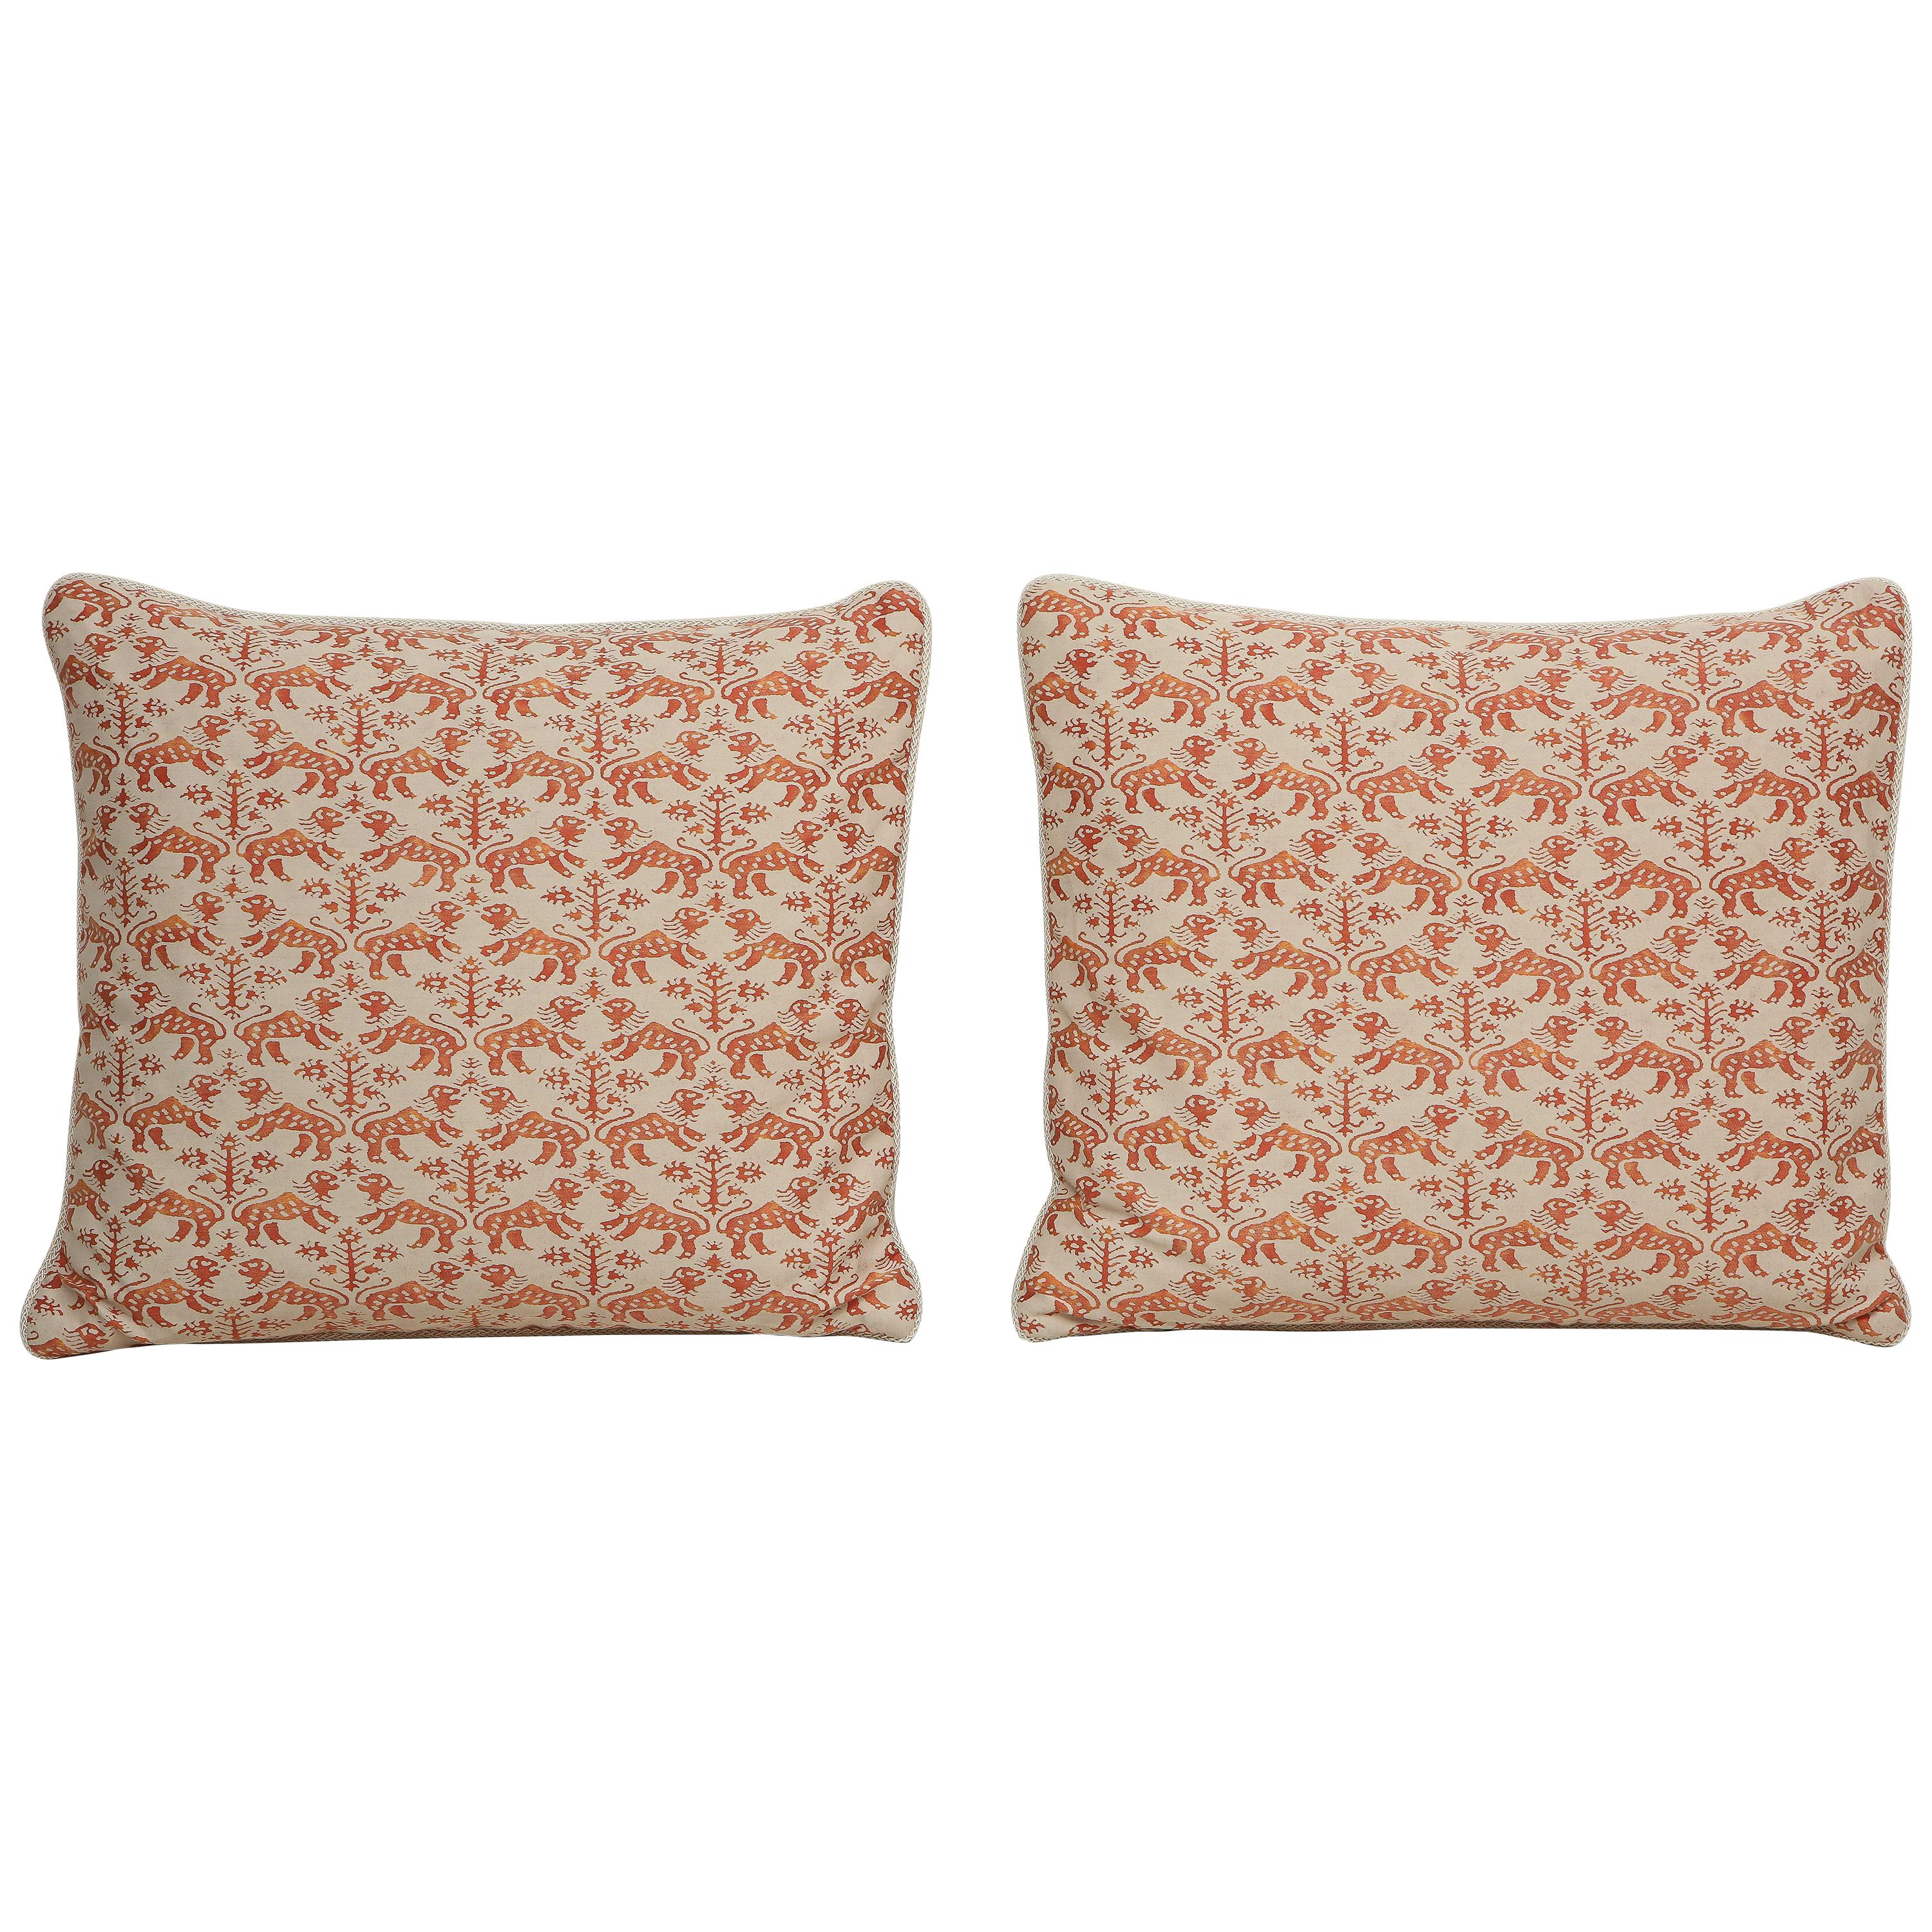 Fortuny Pillow in Orange and Cream